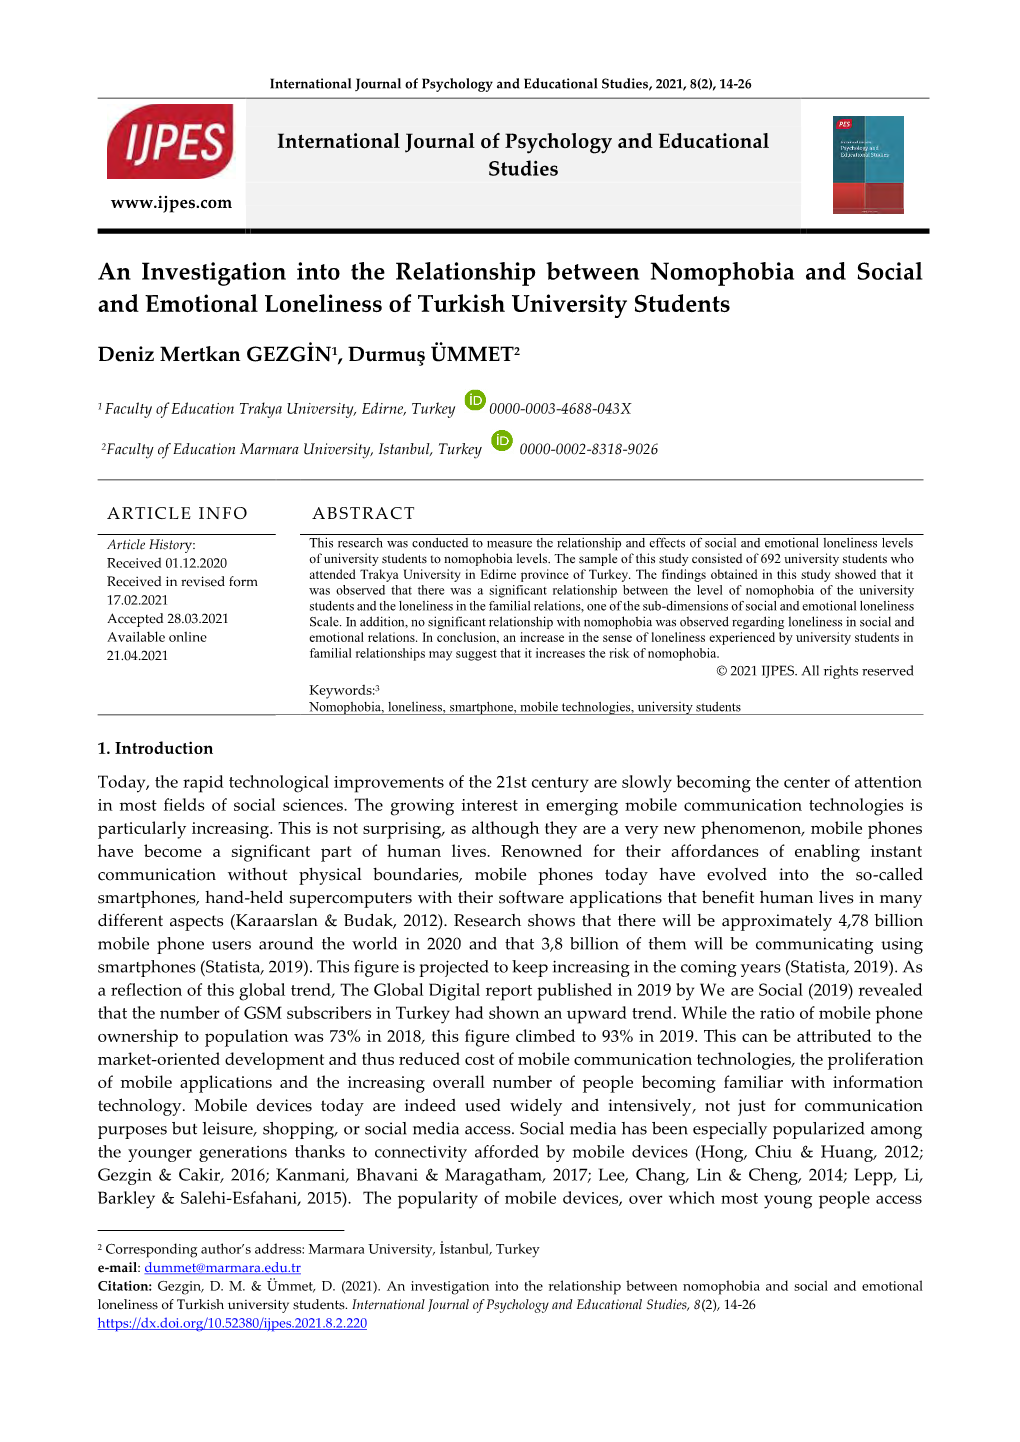 An Investigation Into the Relationship Between Nomophobia and Social and Emotional Loneliness of Turkish University Students